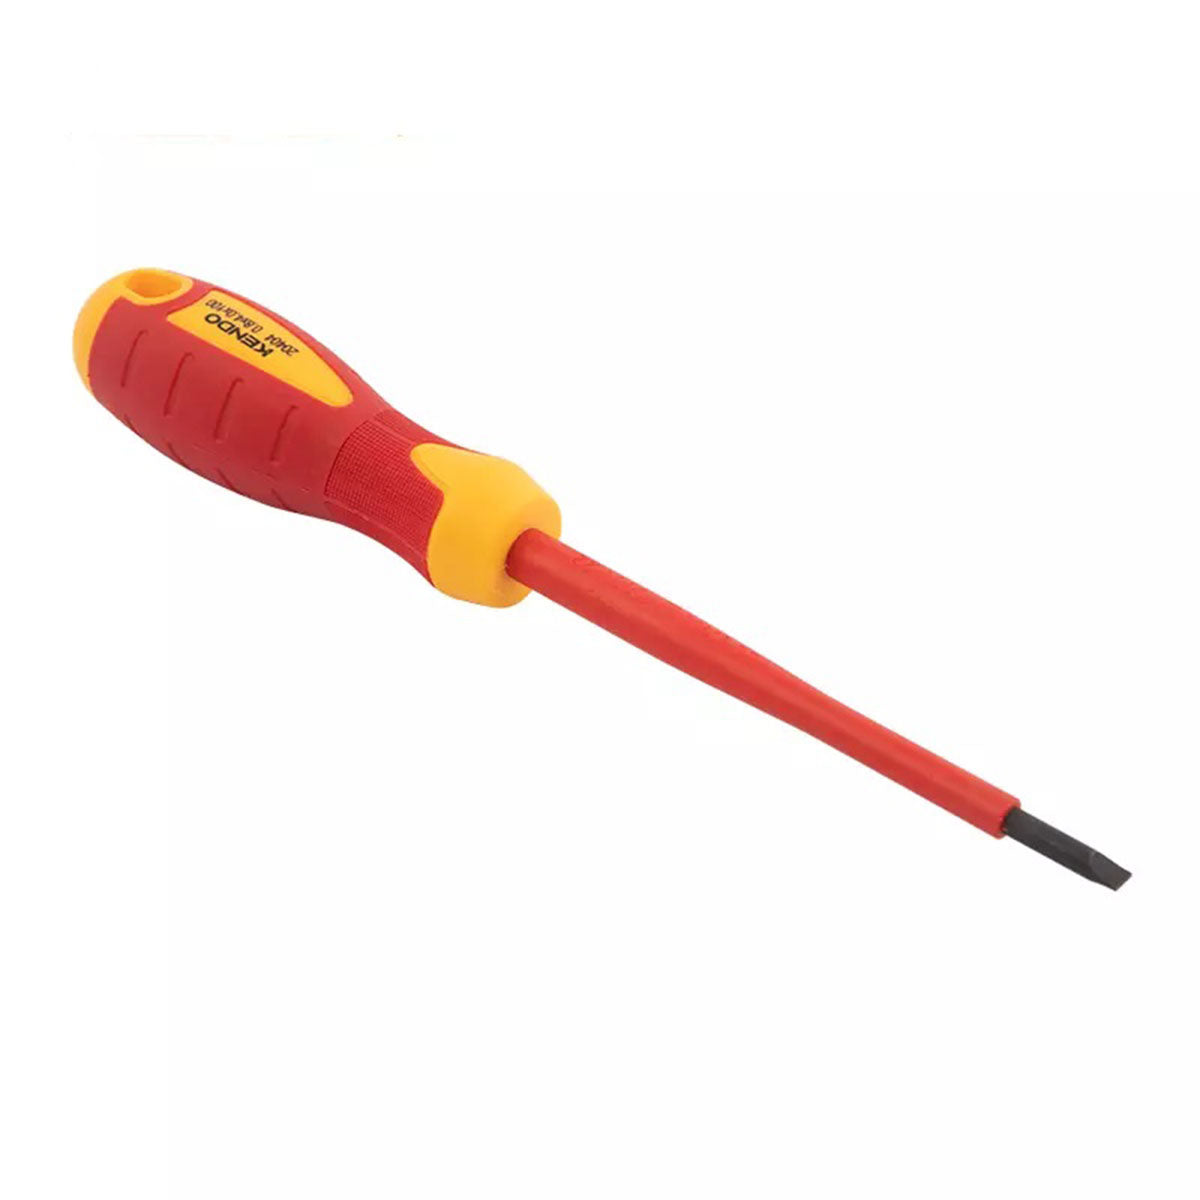 Kendo VDE Screwdriver Slotted 8mm x 175mm